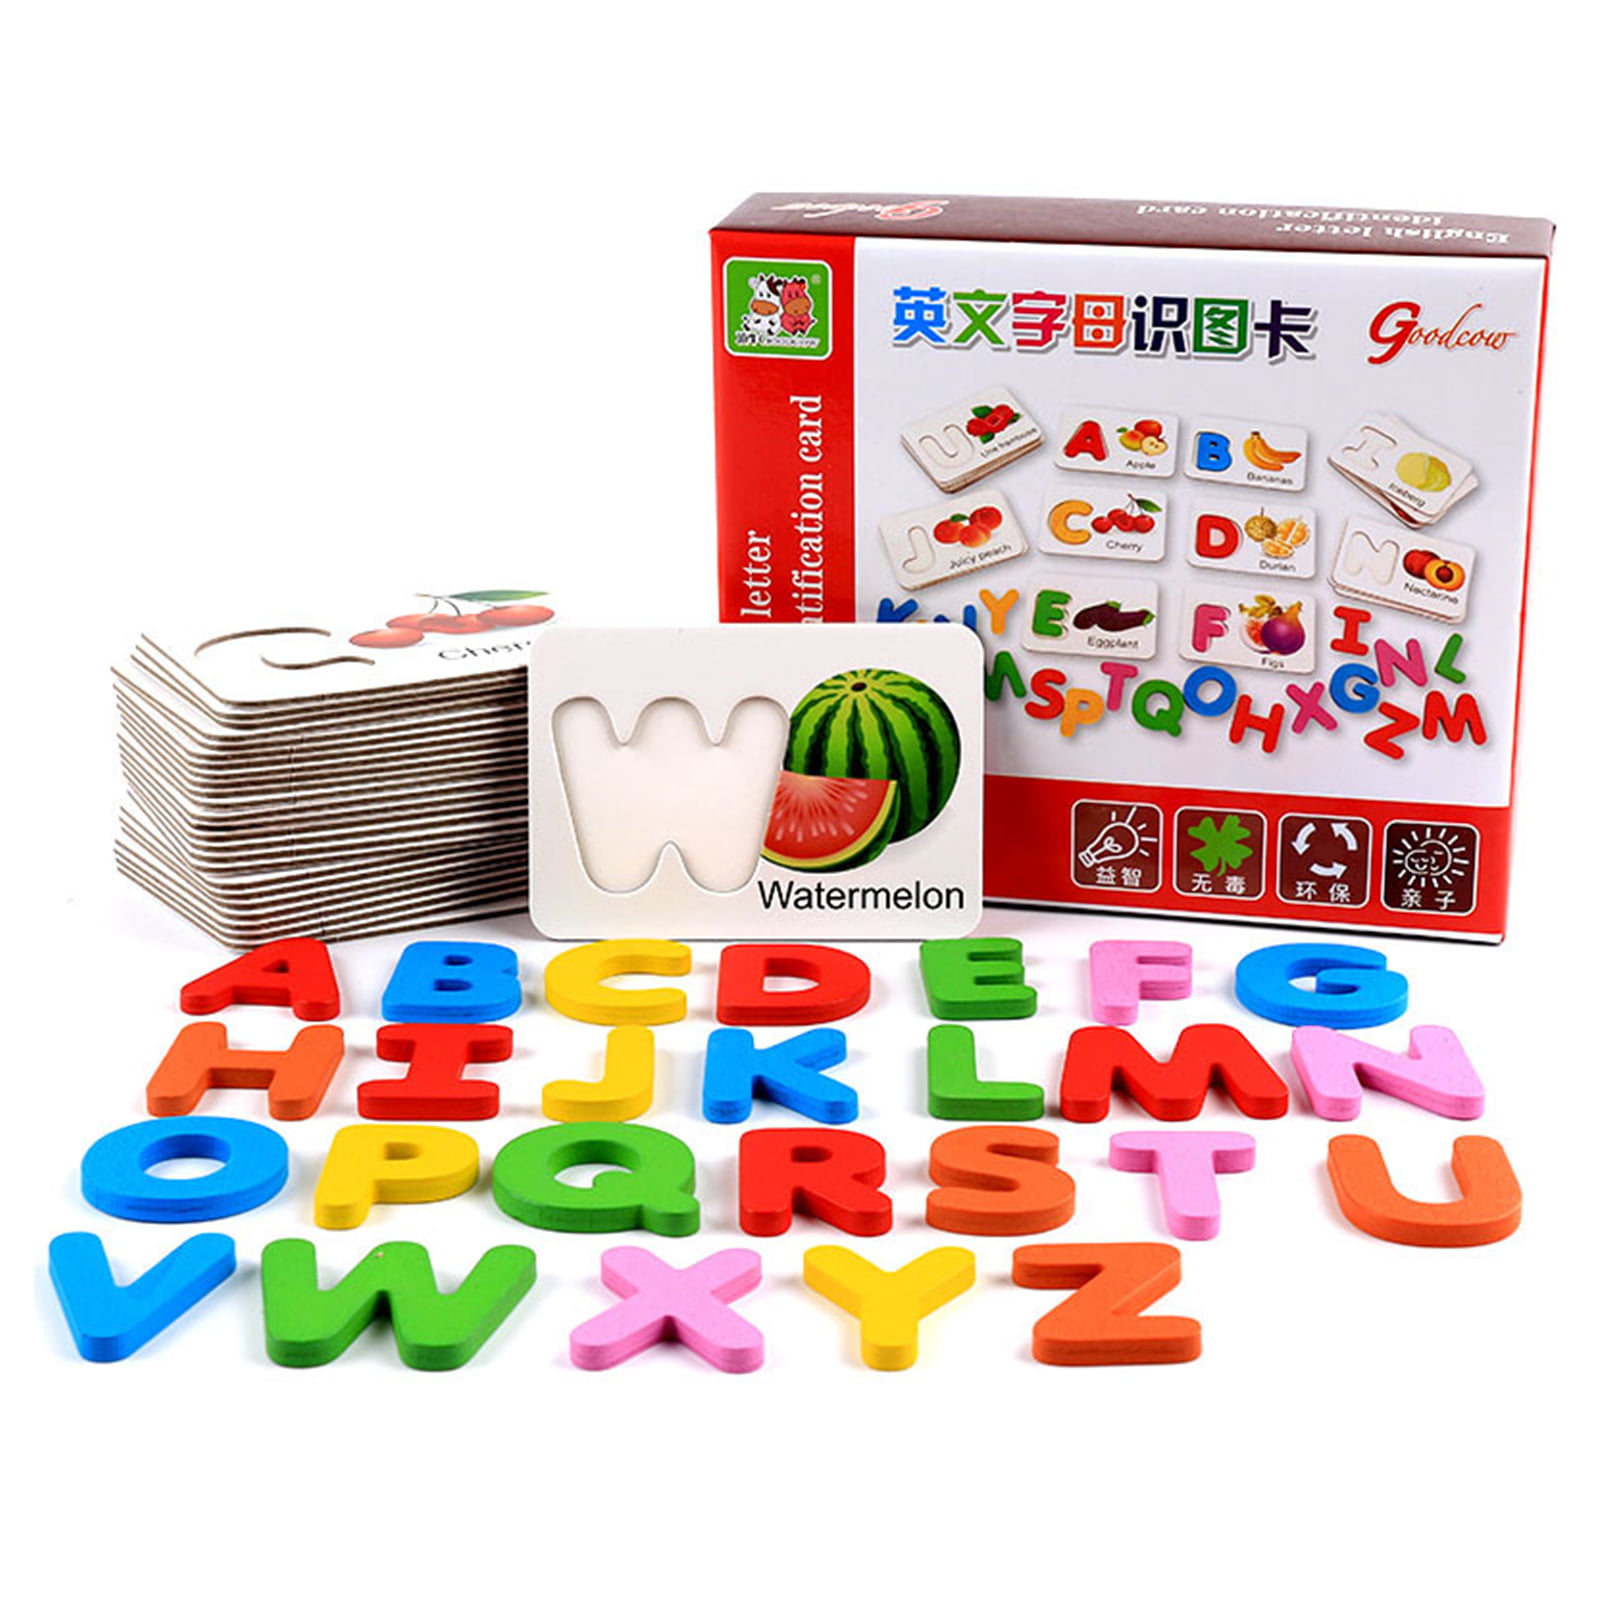 Brand New Kids Greate Educational Puzzle Matching Numbers Game